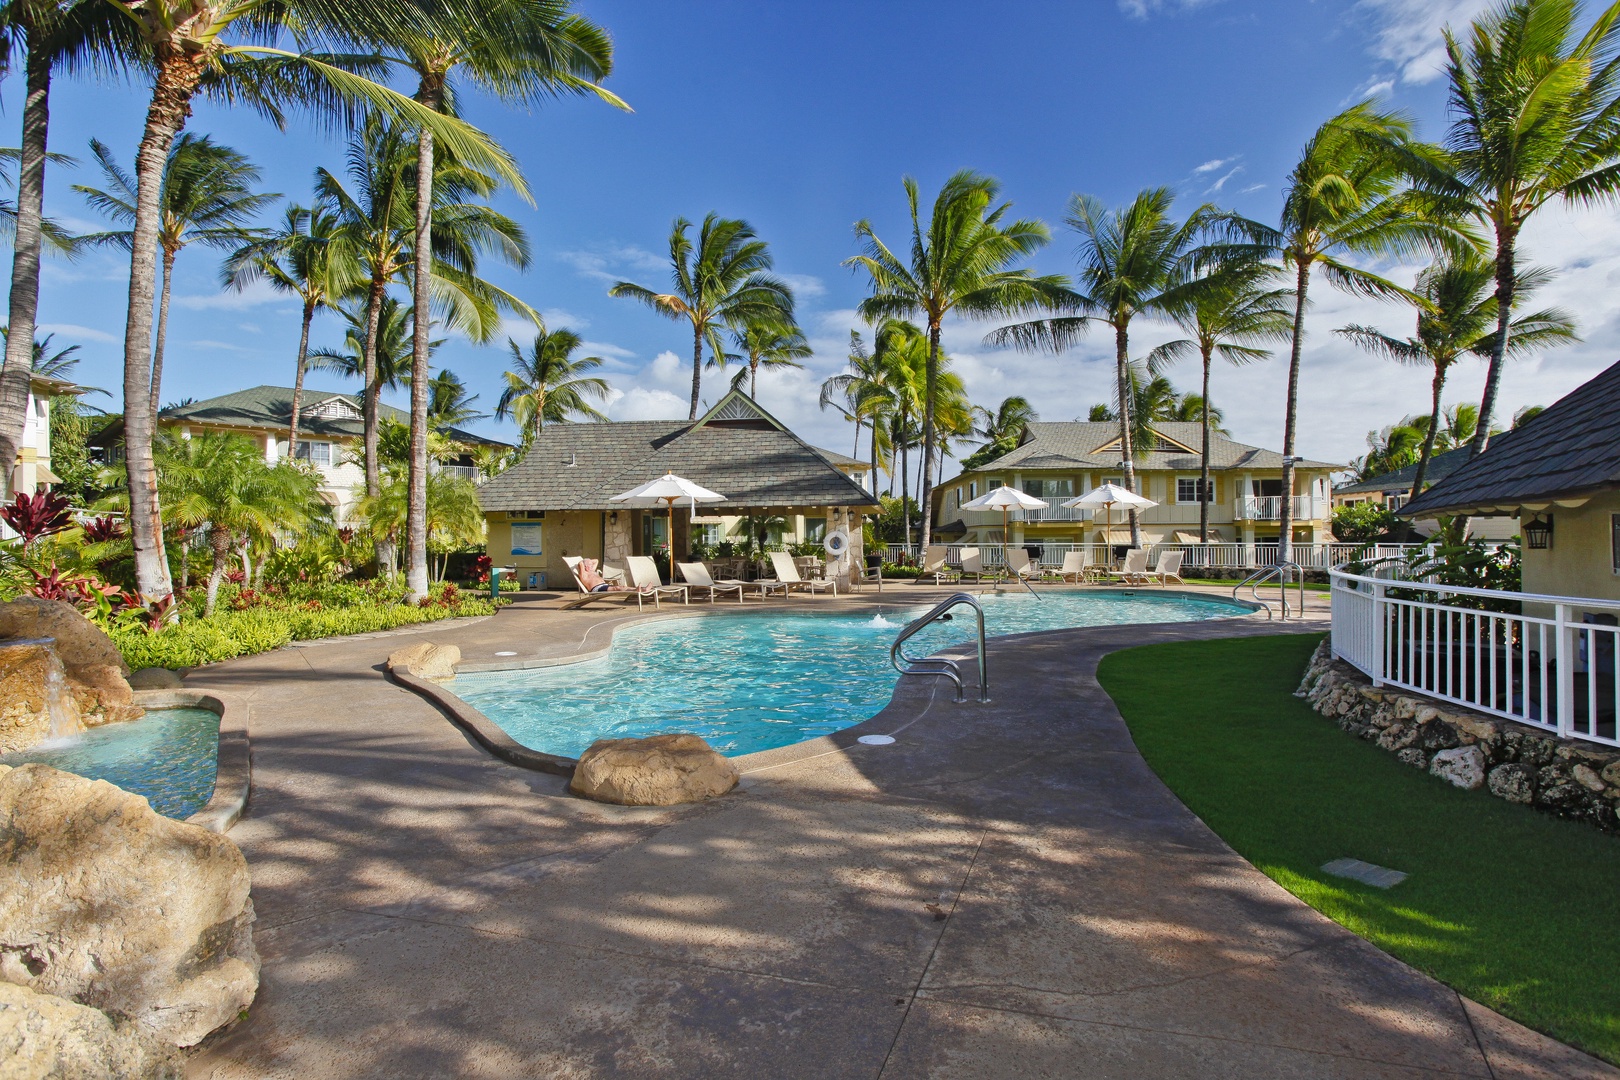 Kapolei Vacation Rentals, Kai Lani 16C - Relax by the community pool with your favorite book.